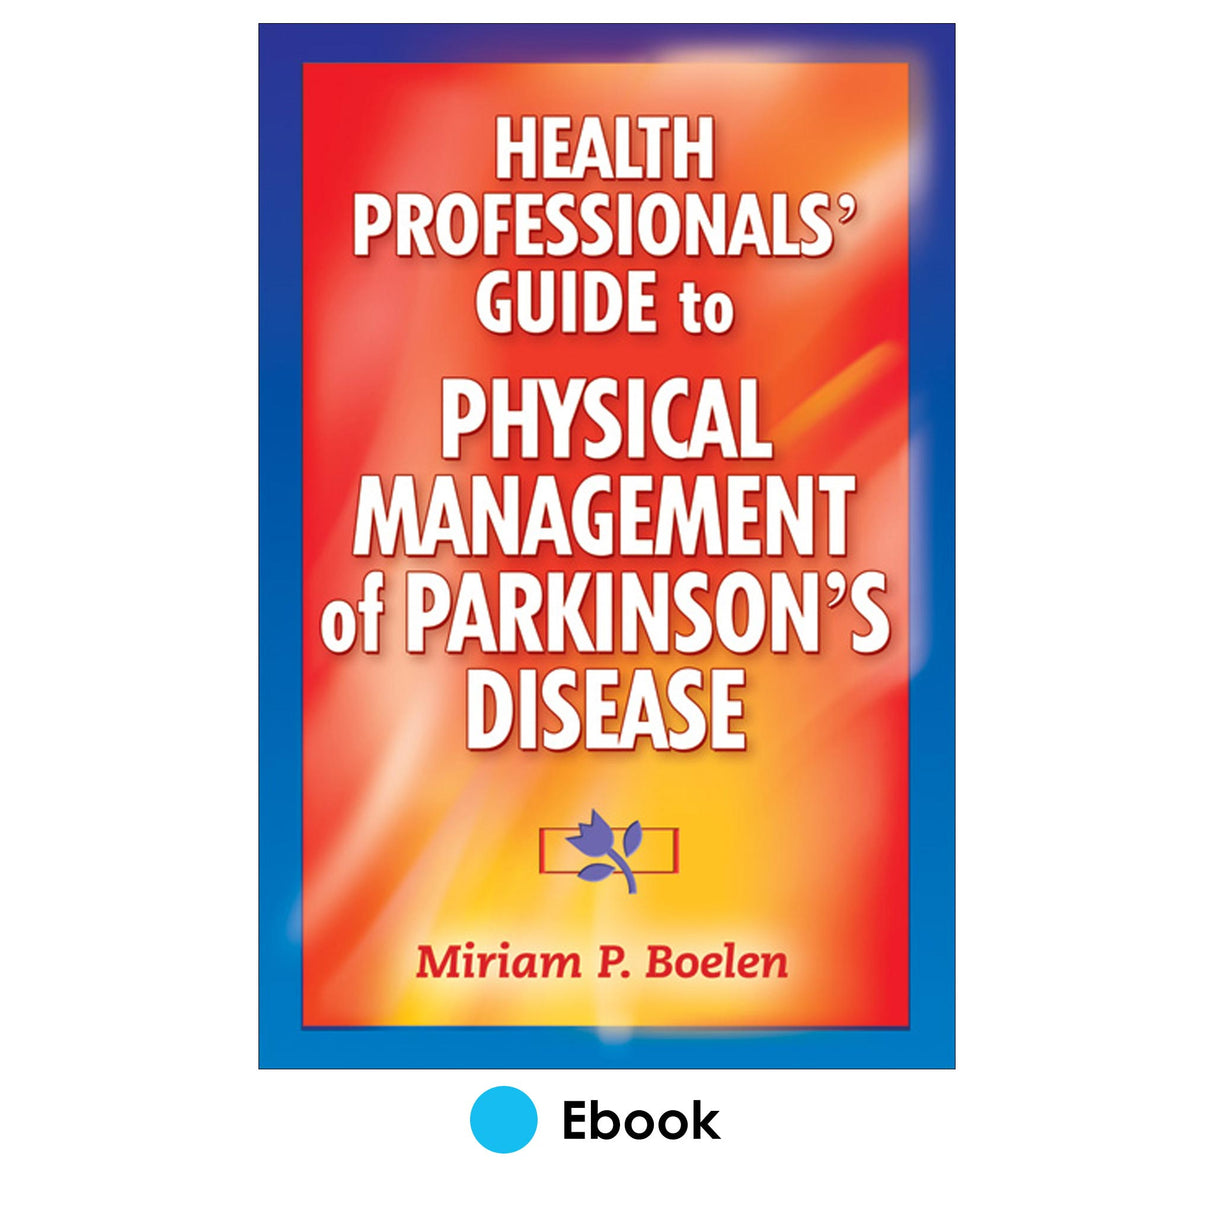 Health Professionals' Guide to the Physical Management of Parkinson's Disease PDF